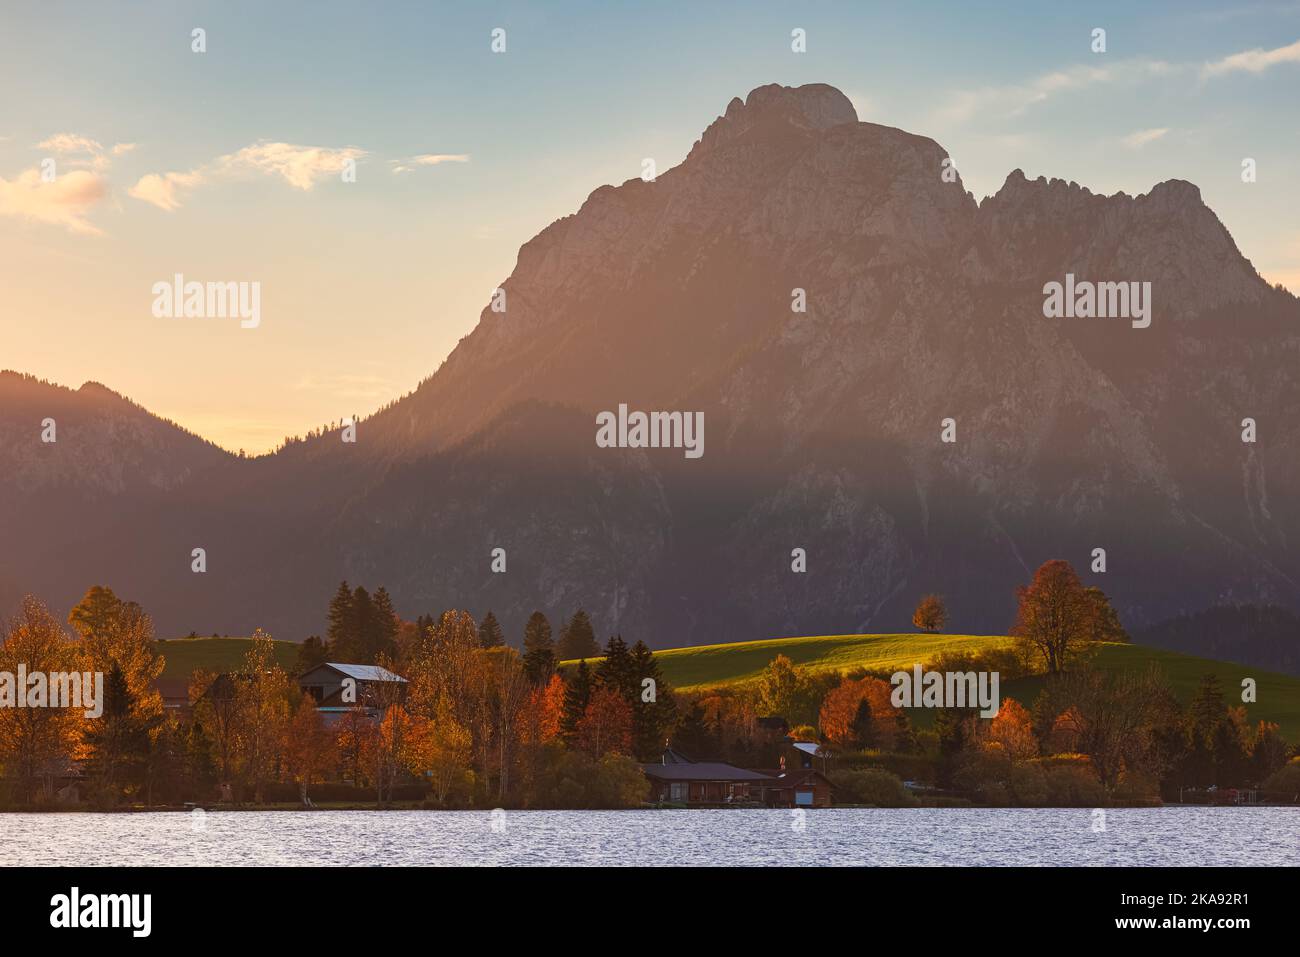 An autumn sunrise at Lake Hopfen (Hopfensee in German) with the Allgauer Alps in the background. Located in Bavaria, southern Germany. Stock Photo